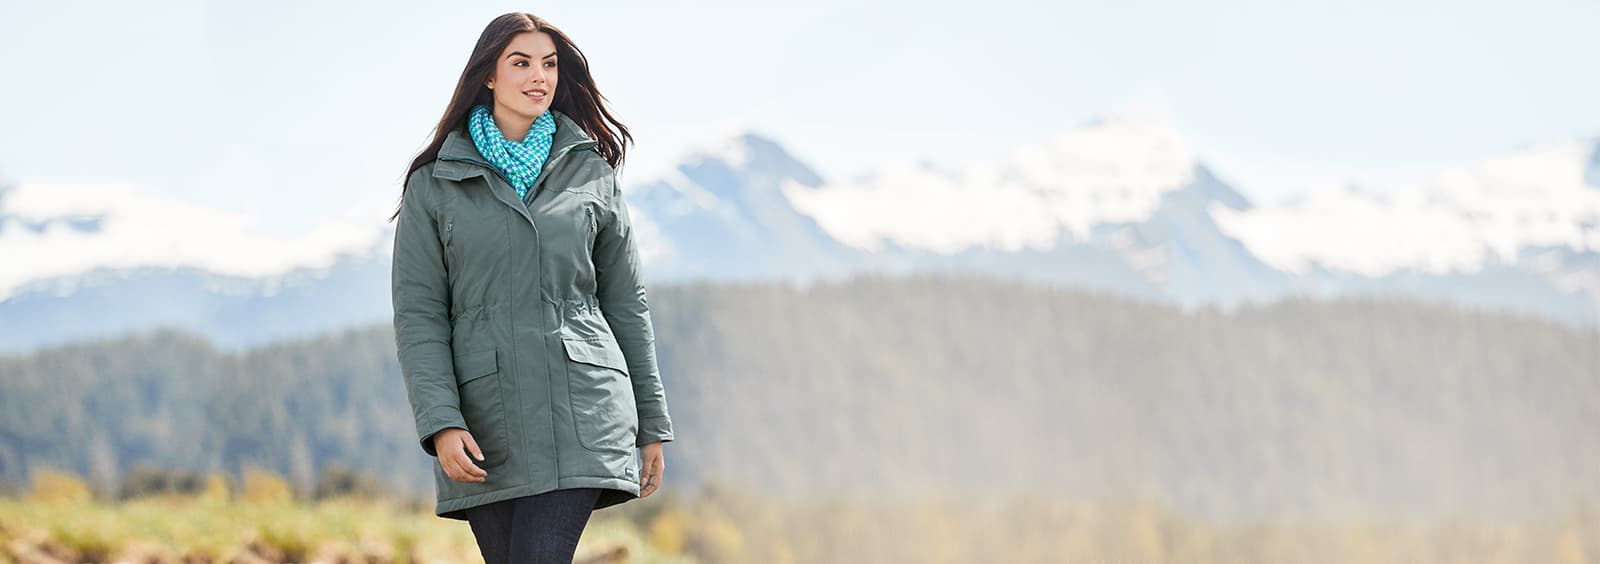 The Best Women's Plus Size Jackets for Camping Escapades